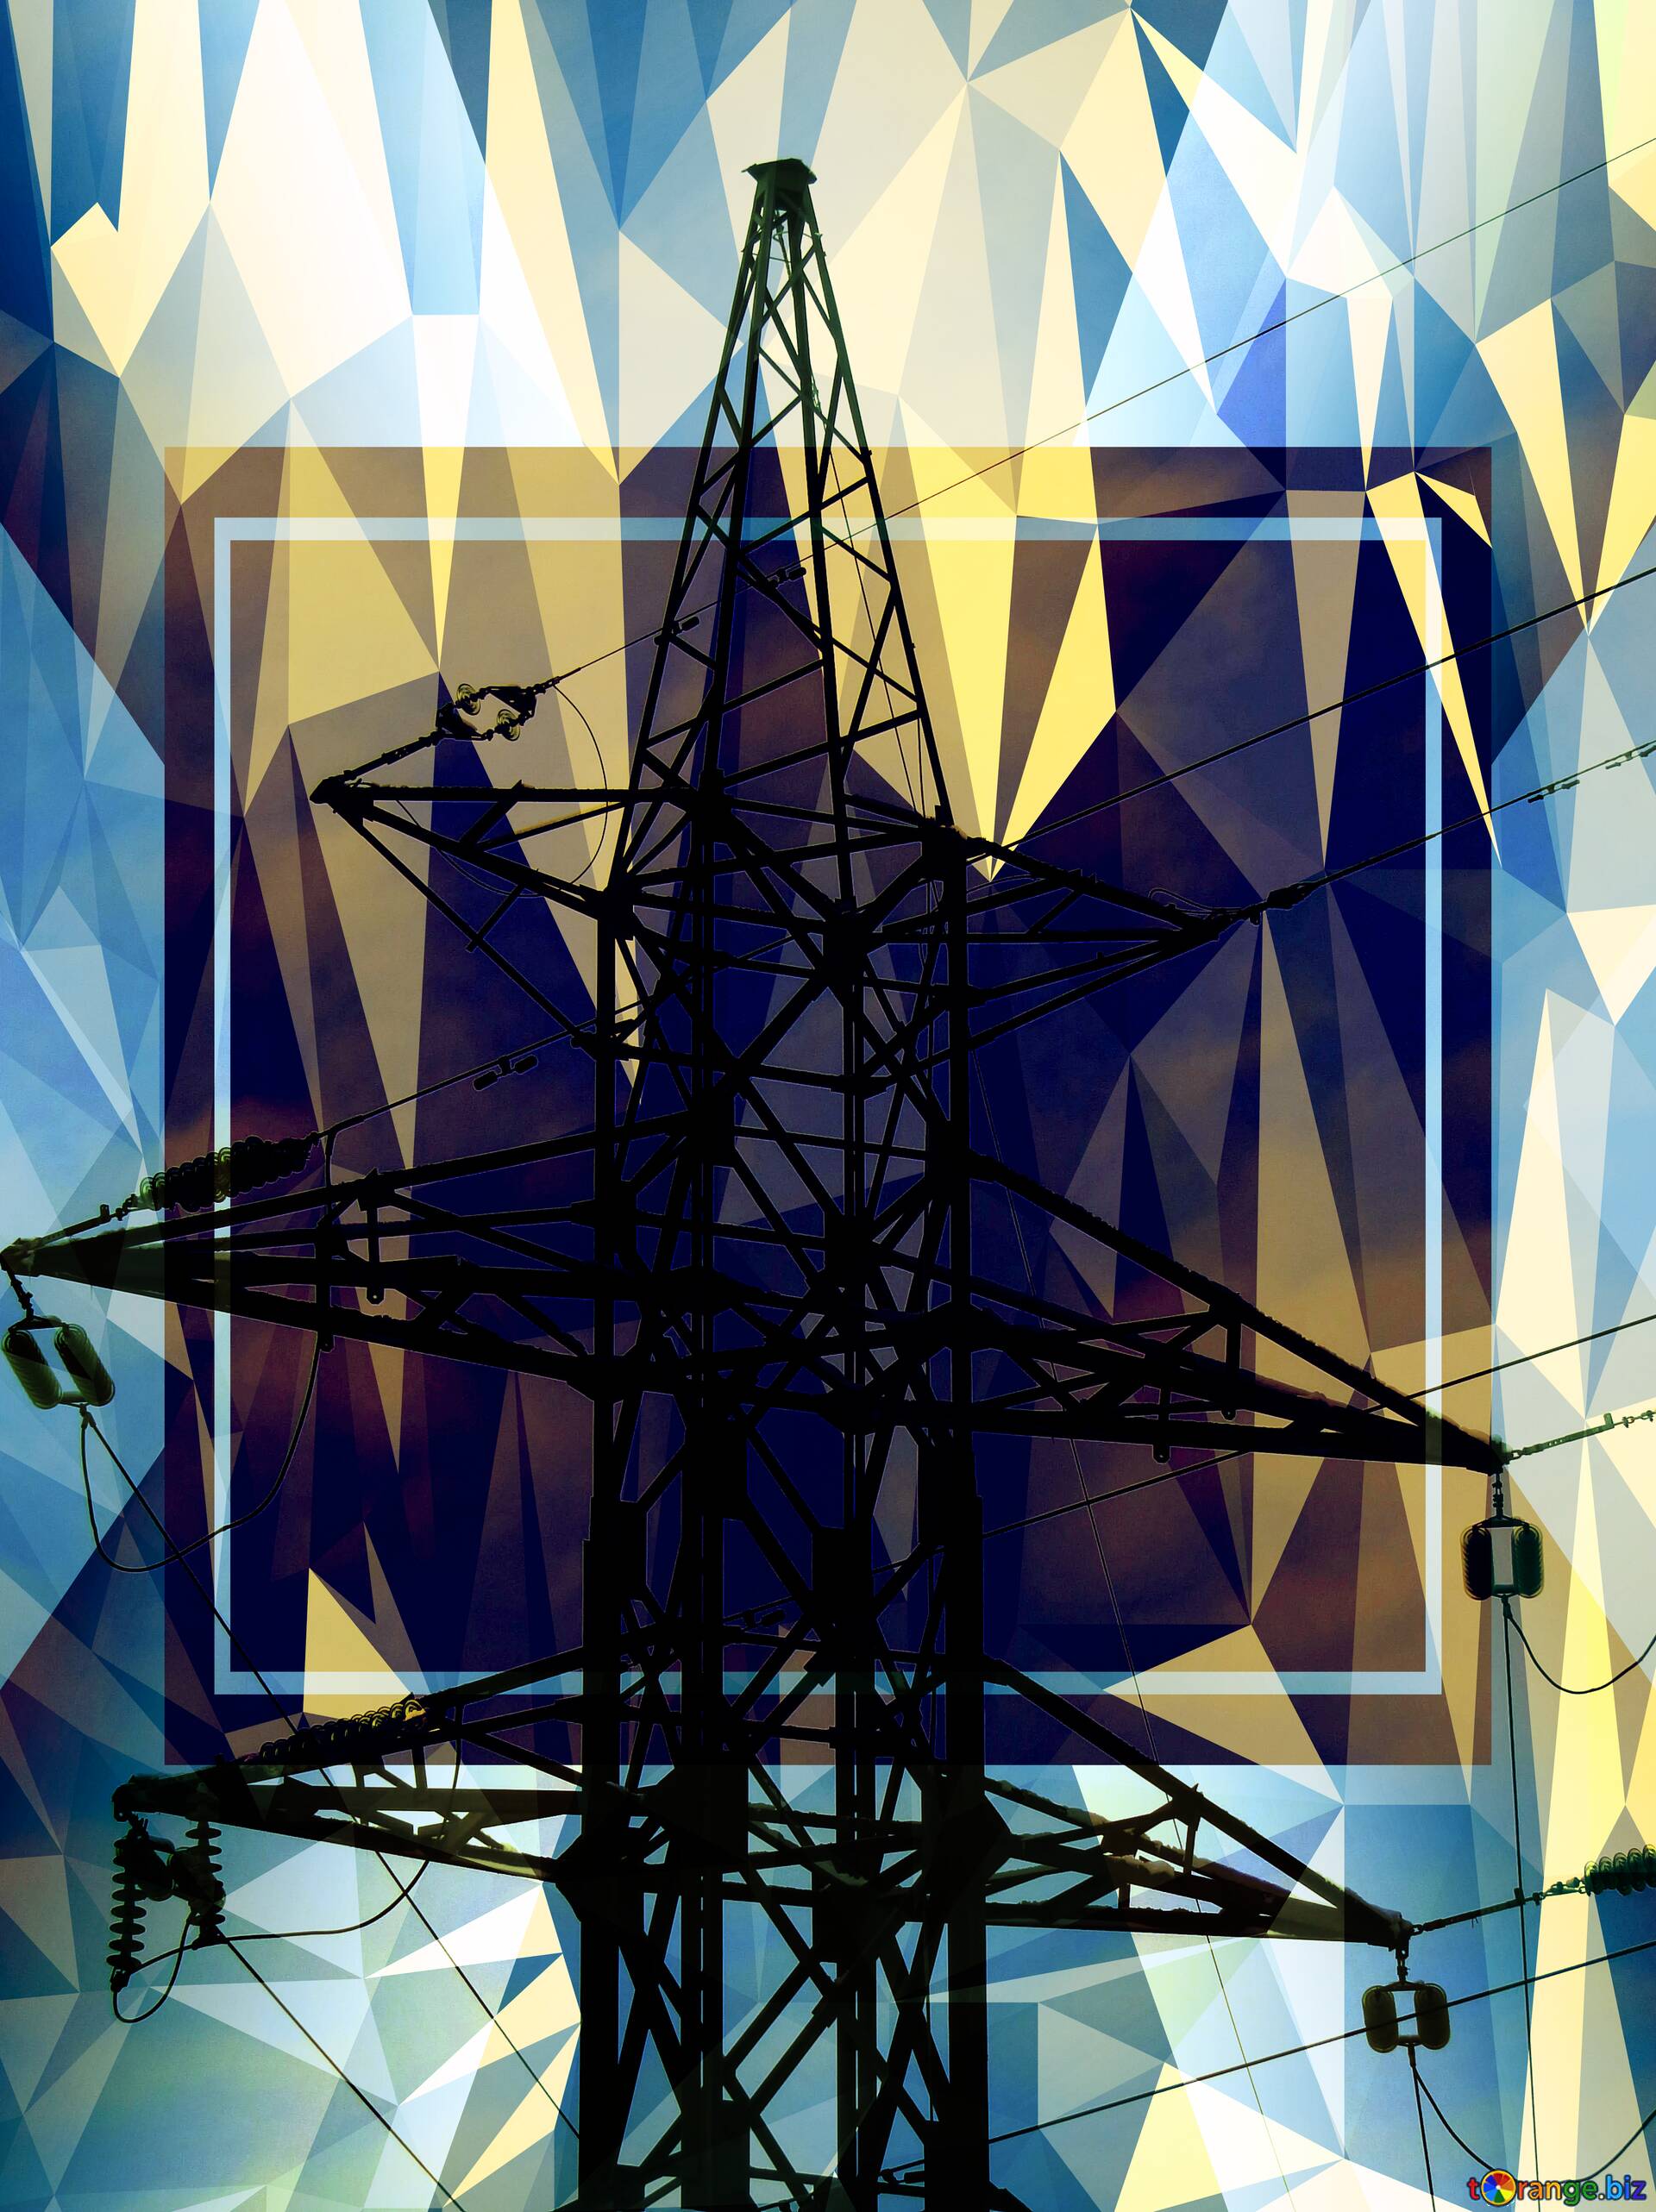 Download free picture Electrical wires Polygonal abstract geometrical